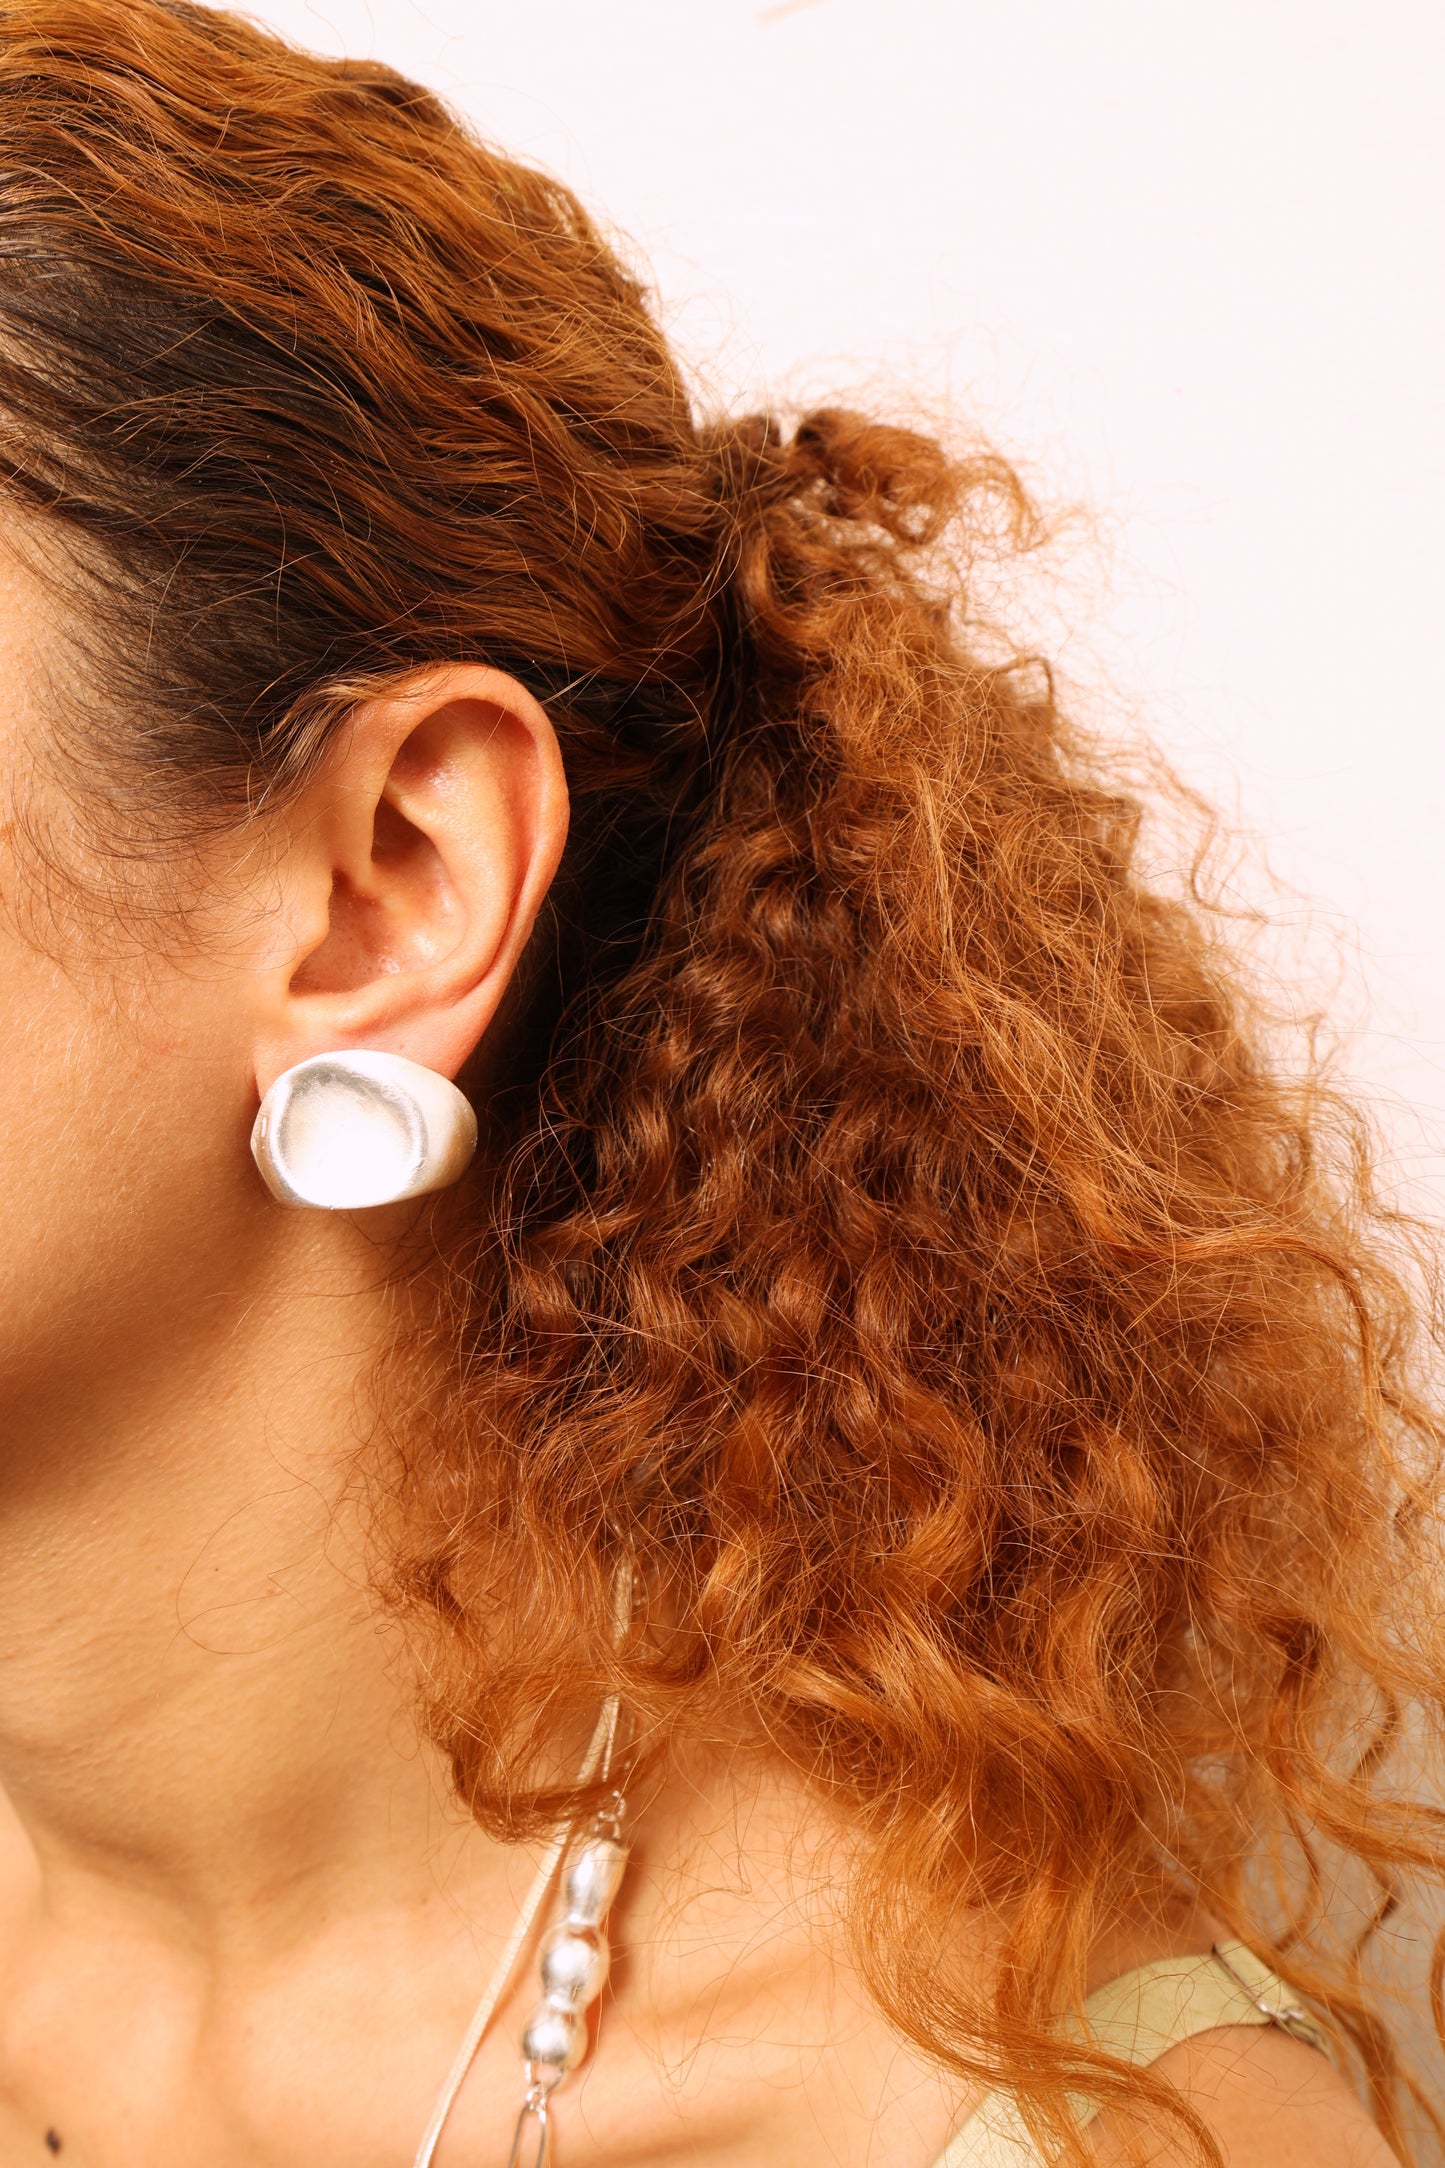 Squished Dome Stud Earring